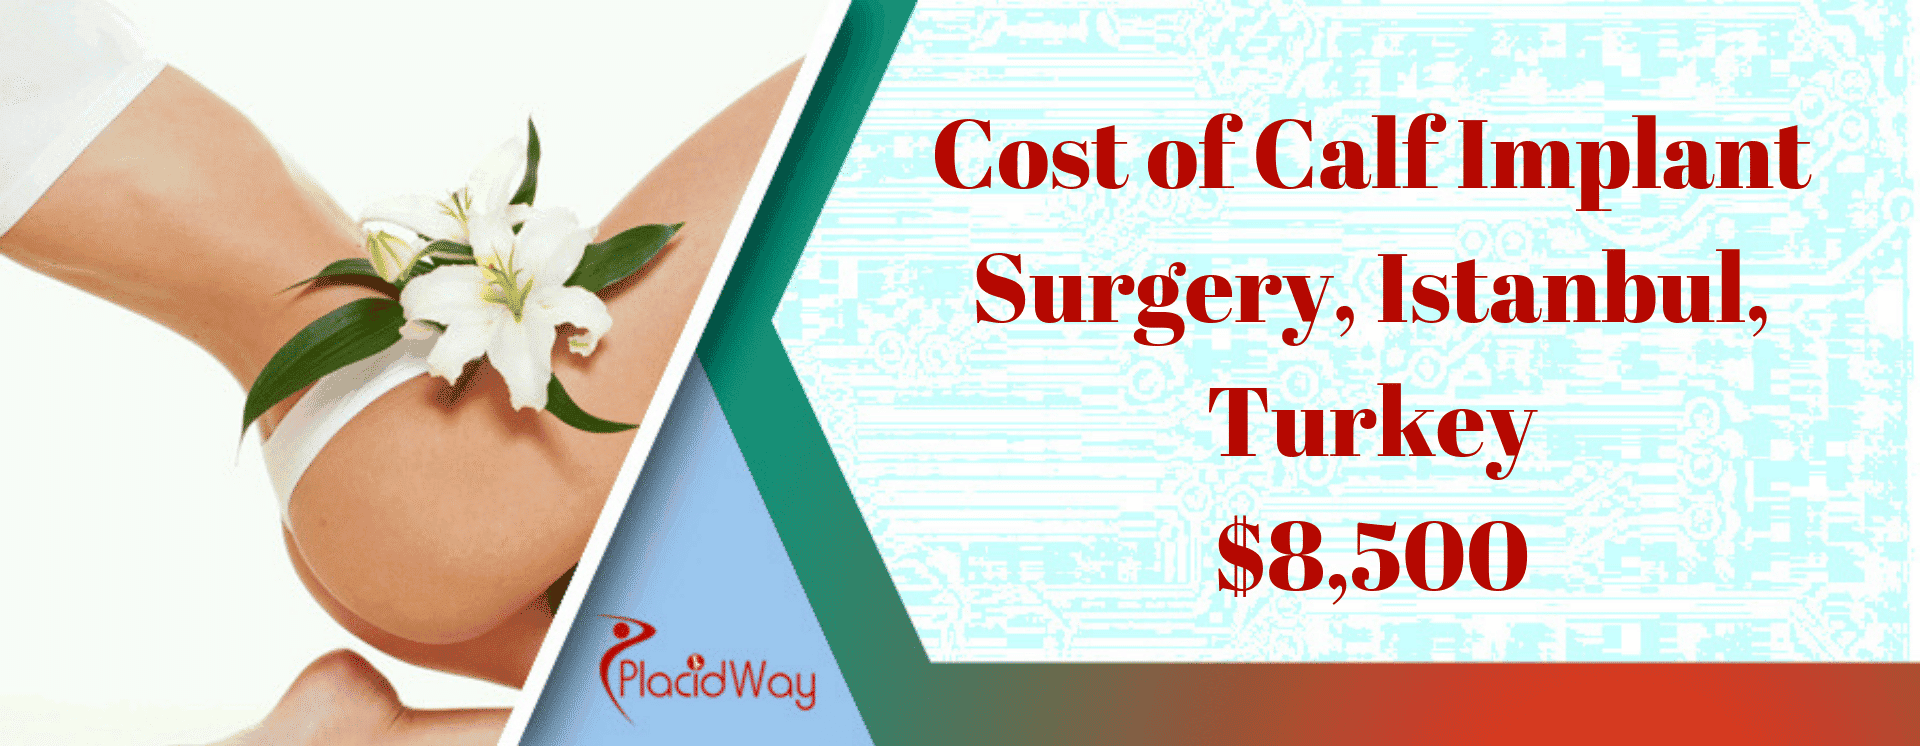 Cost of Calf Implant Surgery in Istanbul, Turkey